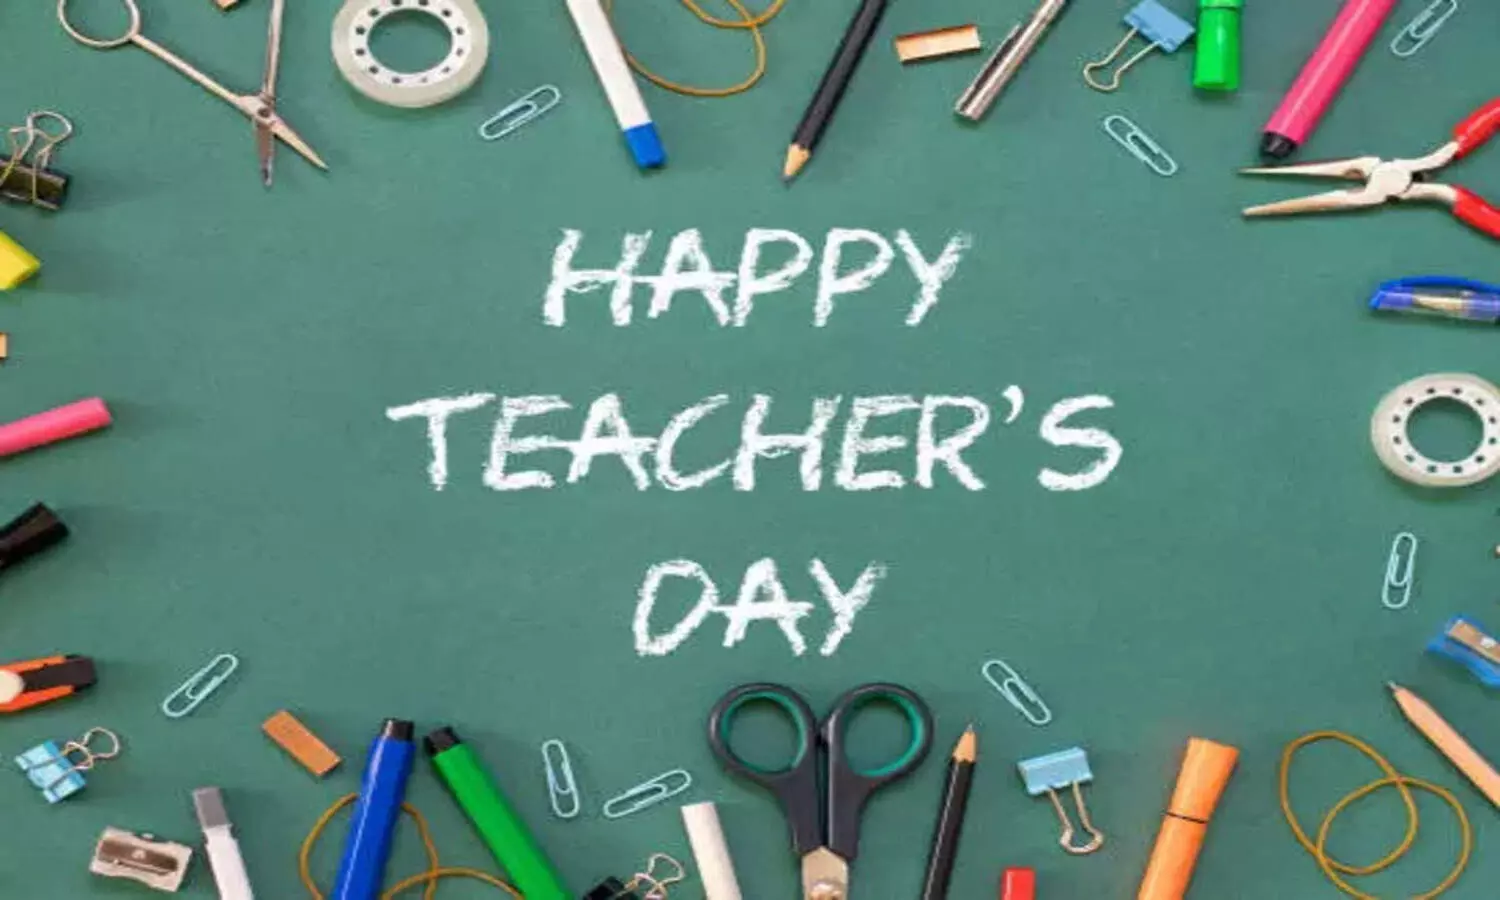 Teachers Day 2021: Planning to surprise your teacher, Here are few tips for you!